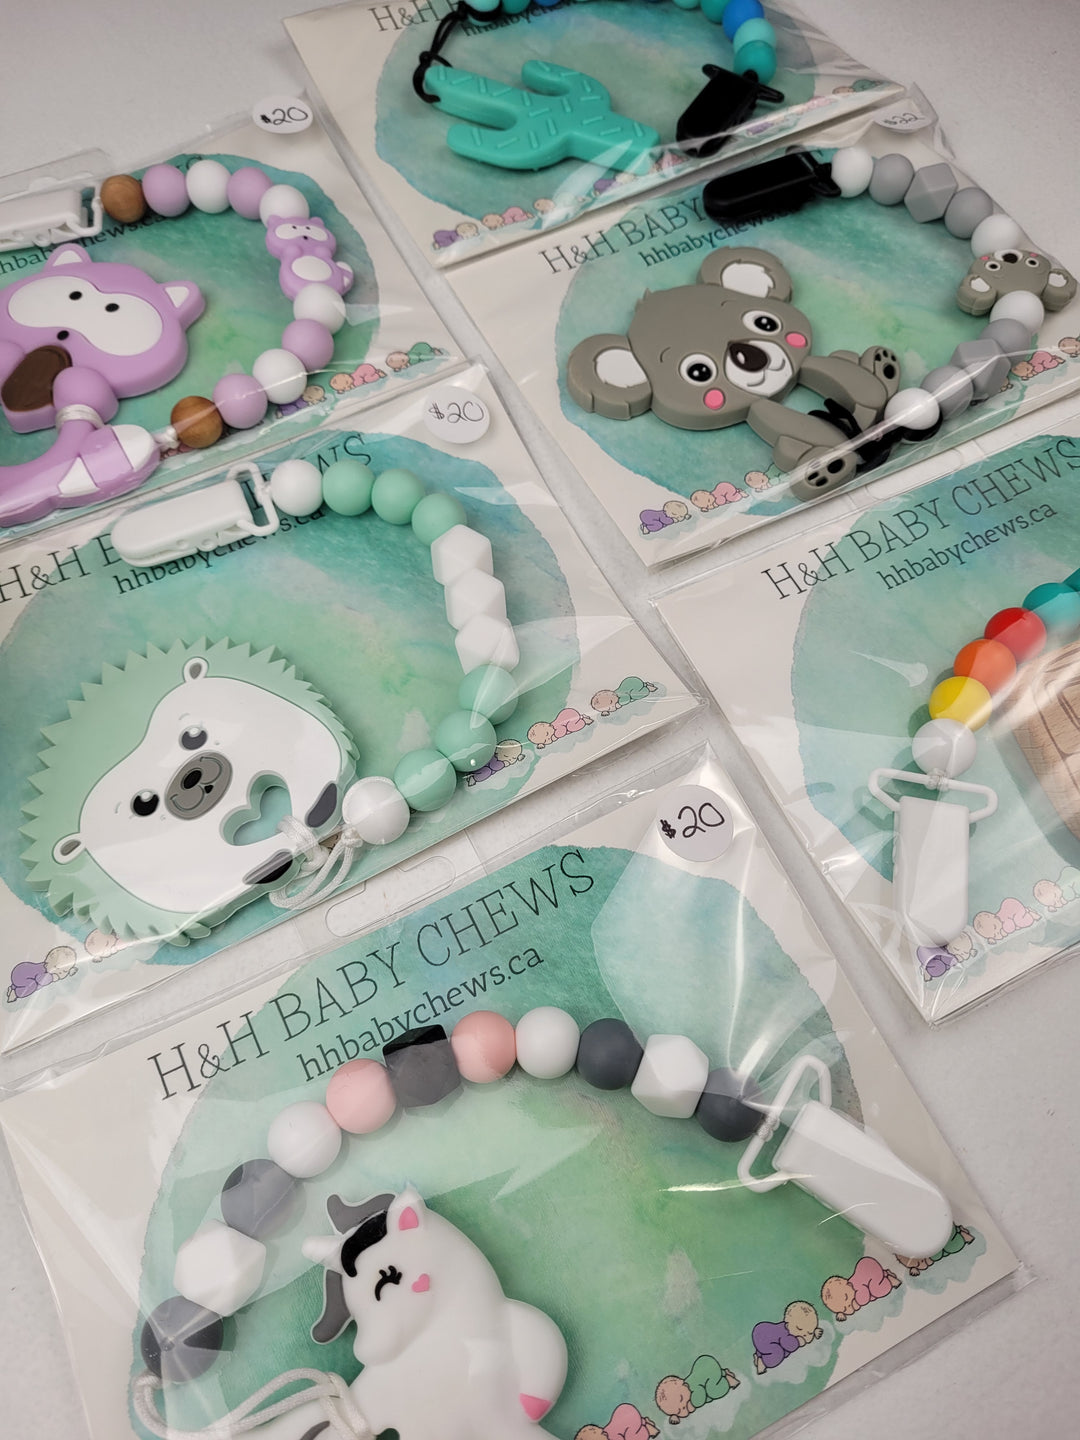 H&H Baby Chews, Silicone Clips with Teething Toys